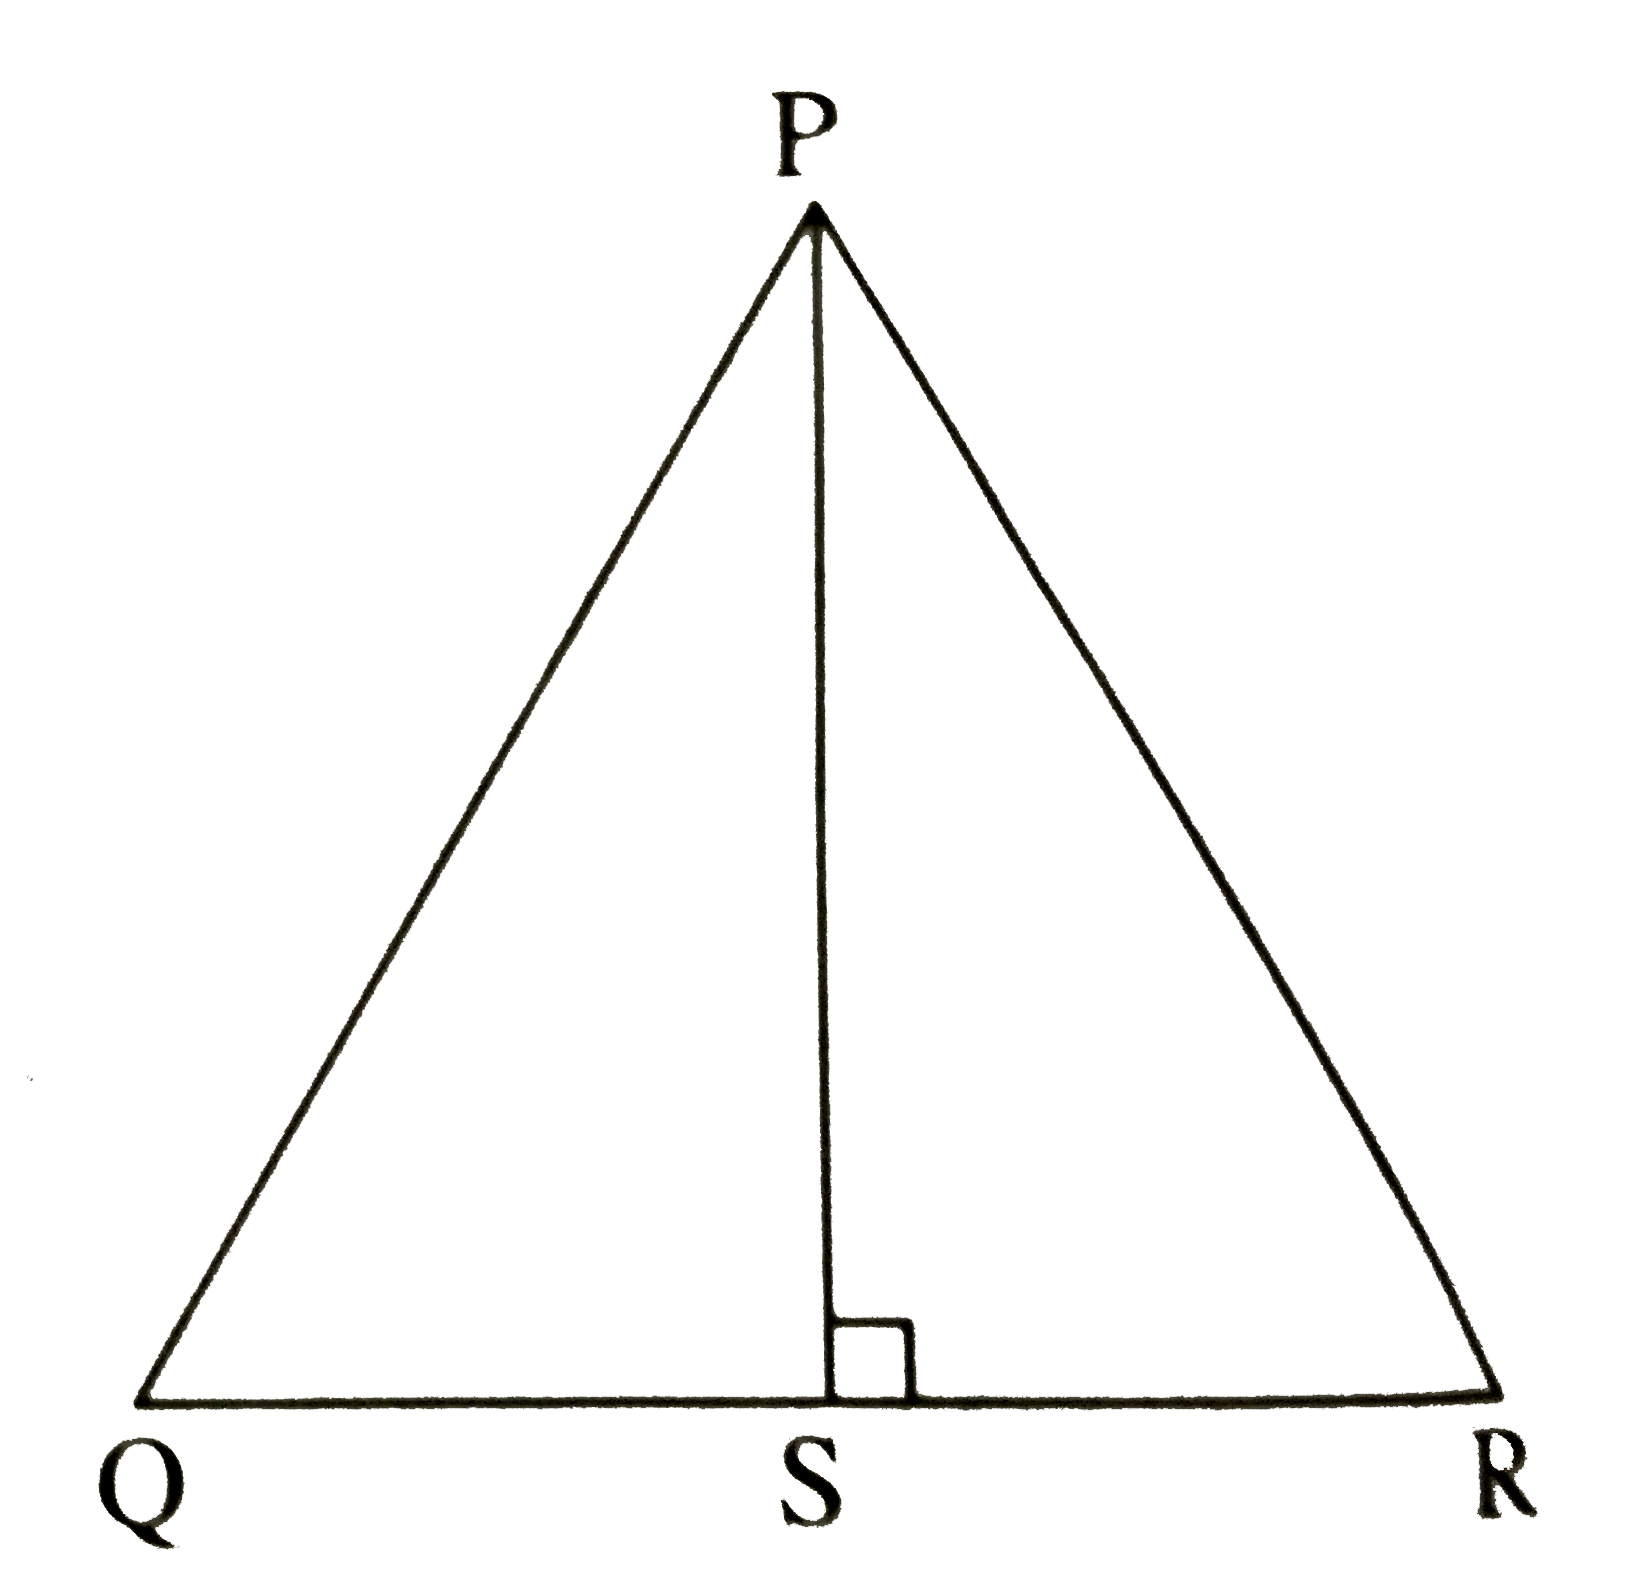 DeltaPQR is an equilateral triangle. Seg PS bot side QR such that Q-S-R. Prove PS^(2)=3QS^(2) by completing the following activity.   In DeltaPQS,   /PSQ=square……(Given)   /Q=square………….(Angle of an equilateral triangle)   :. /QPS=30^(@).................(Remaining angle of DeltaPQS)   :.DeltaPQS is a square triangle   PS=square PQ.............(Side opposite to 60^(@))..............(1)   and QS=square PQ..........(Side opposite to 30^(@))   PQ=2QS .....(2)   Substituting value of PQ from (2) in (1)   PS=(sqrt(3))/(2)xx2QS   :.PS=square QS   :.PS^(2)=3QS^(2)......(Square both the sides)